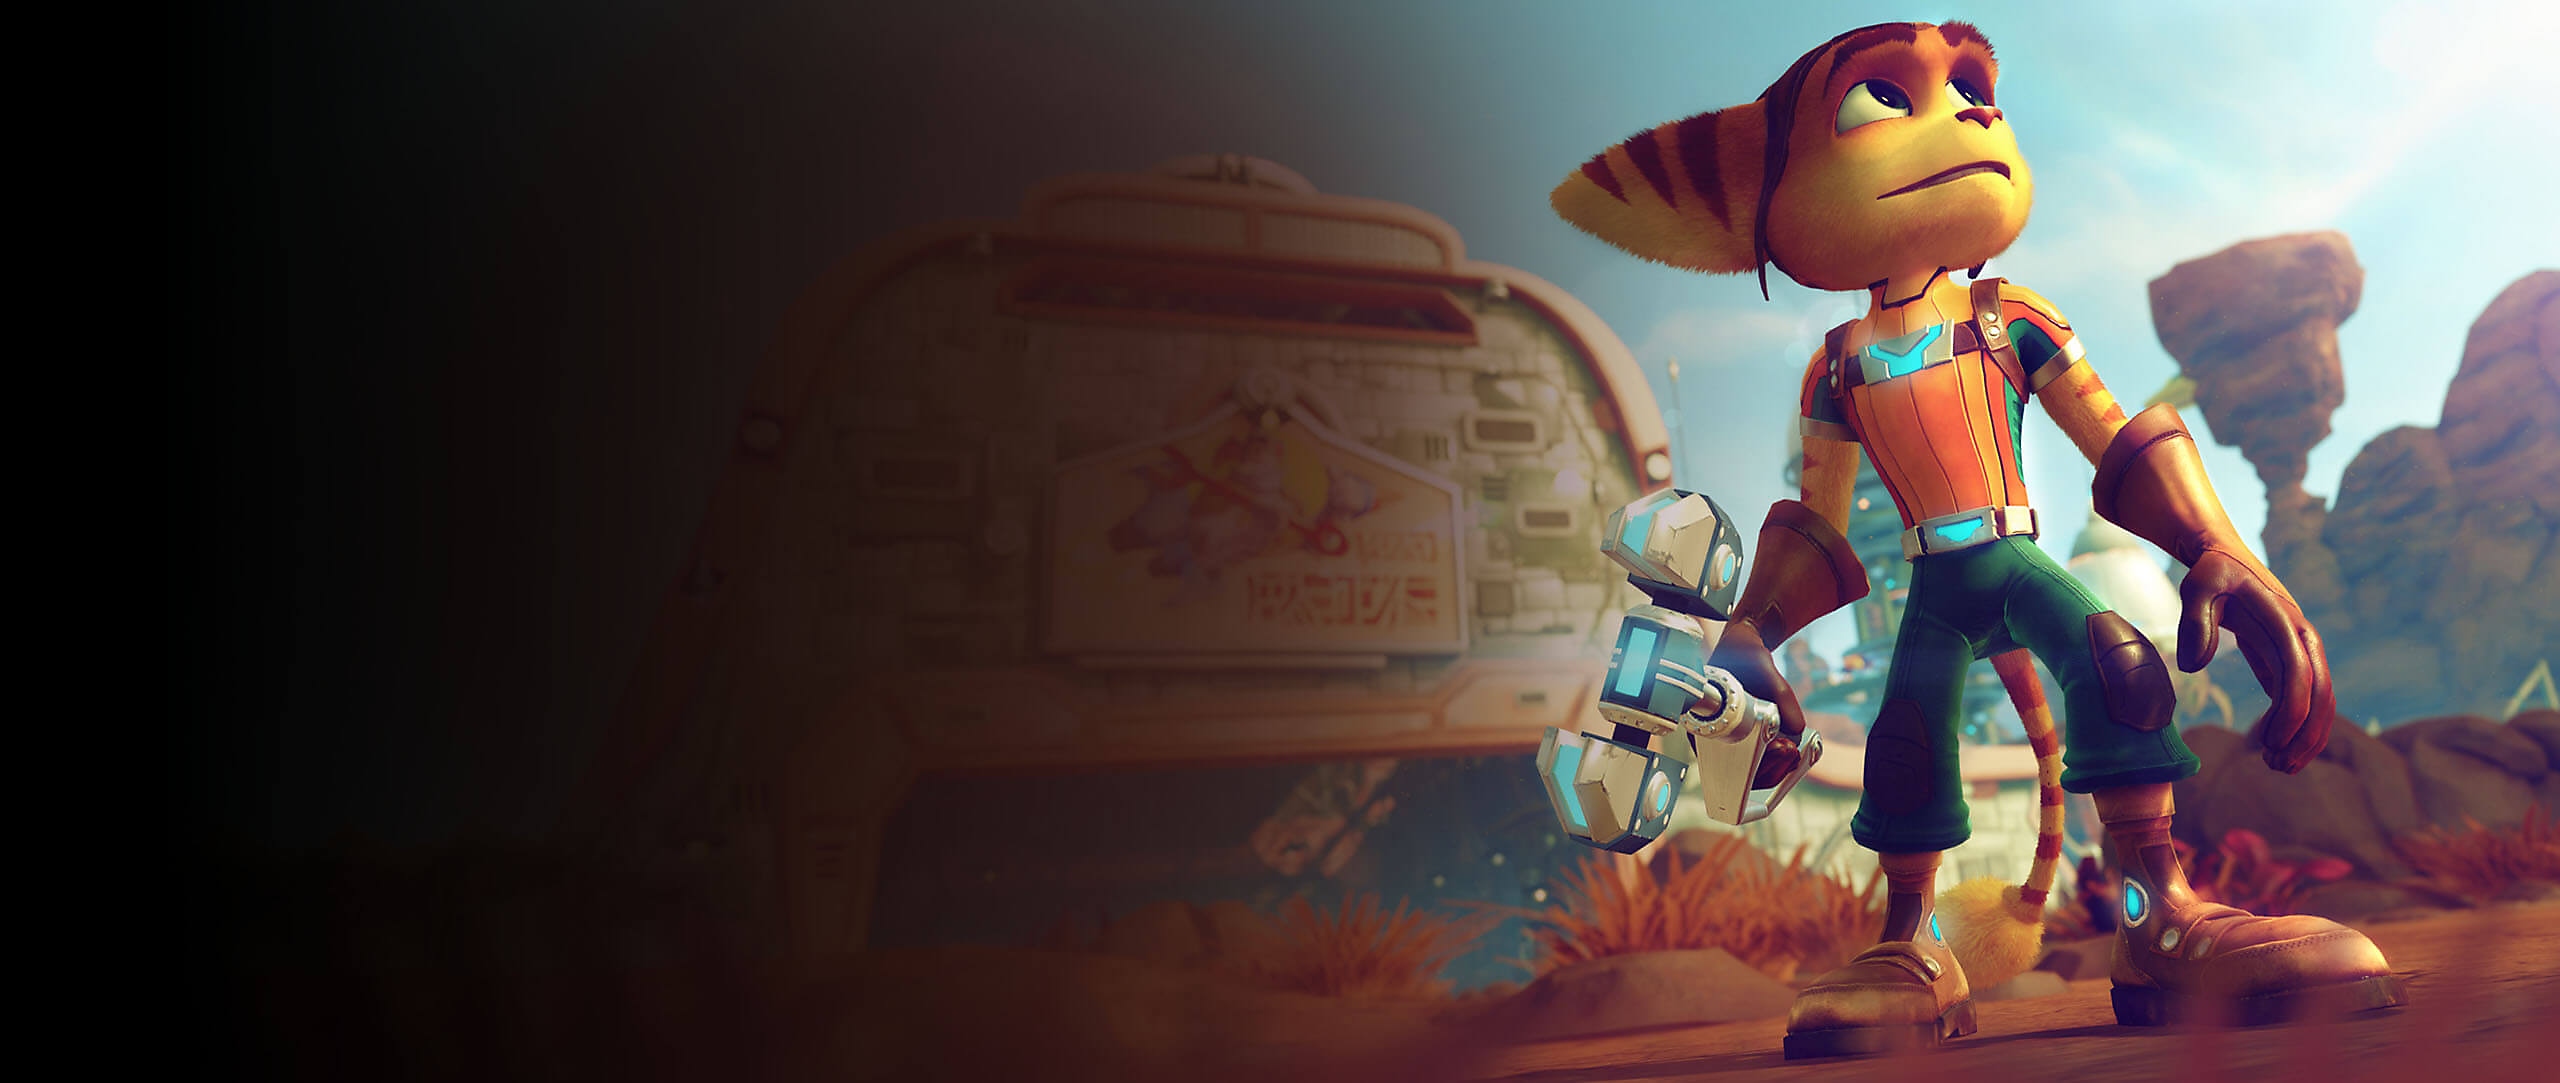 《Ratchet and Clank》